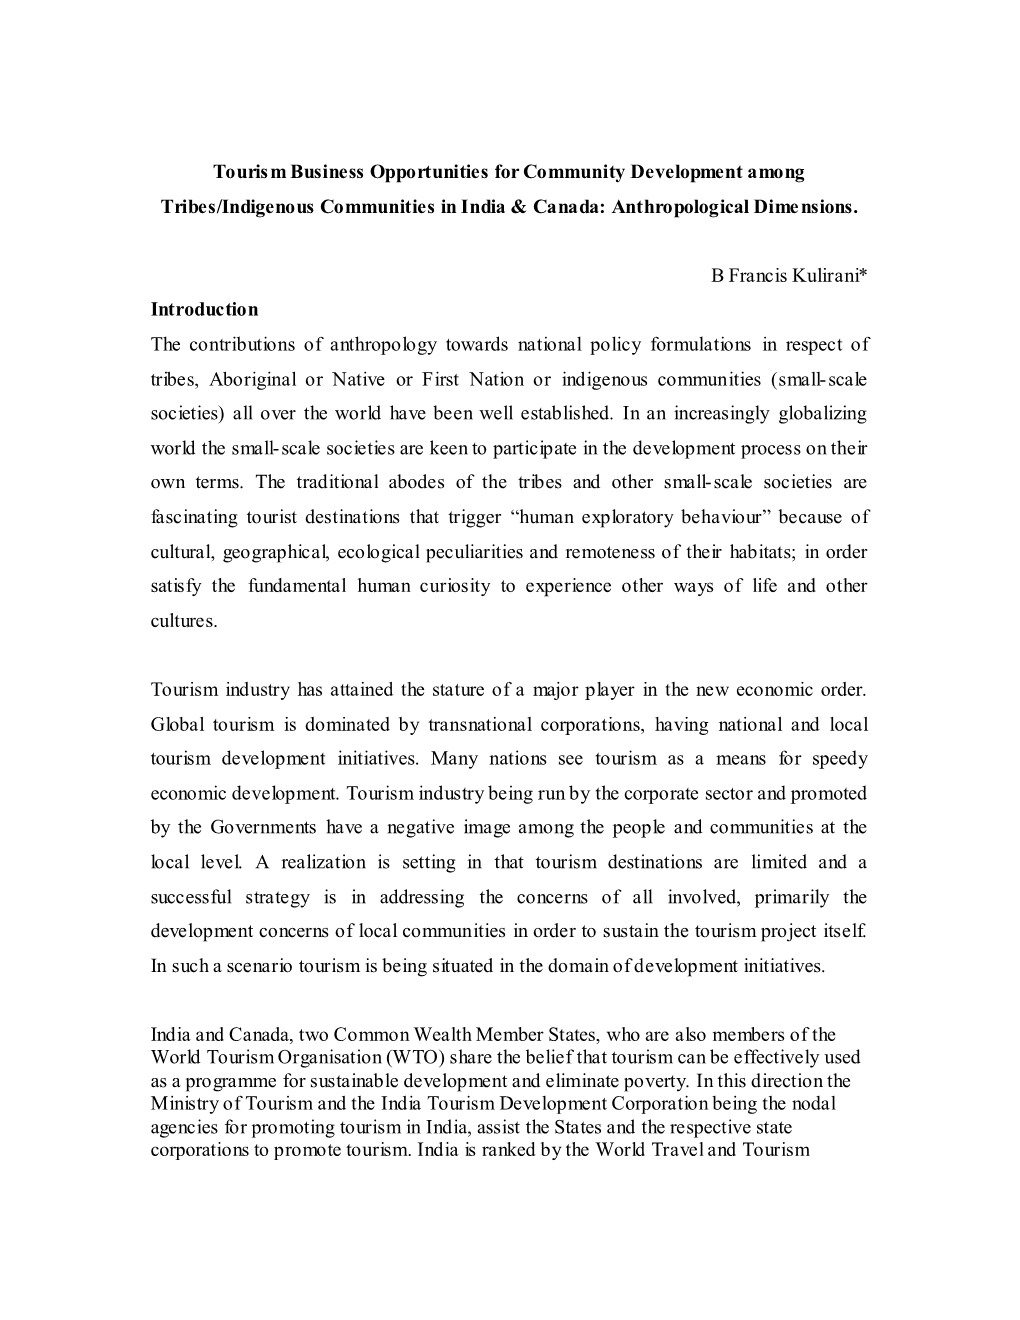 Tourism Business Opportunities for Community Development Among Tribes/Indigenous Communities in India & Canada: Anthropological Dime Nsions